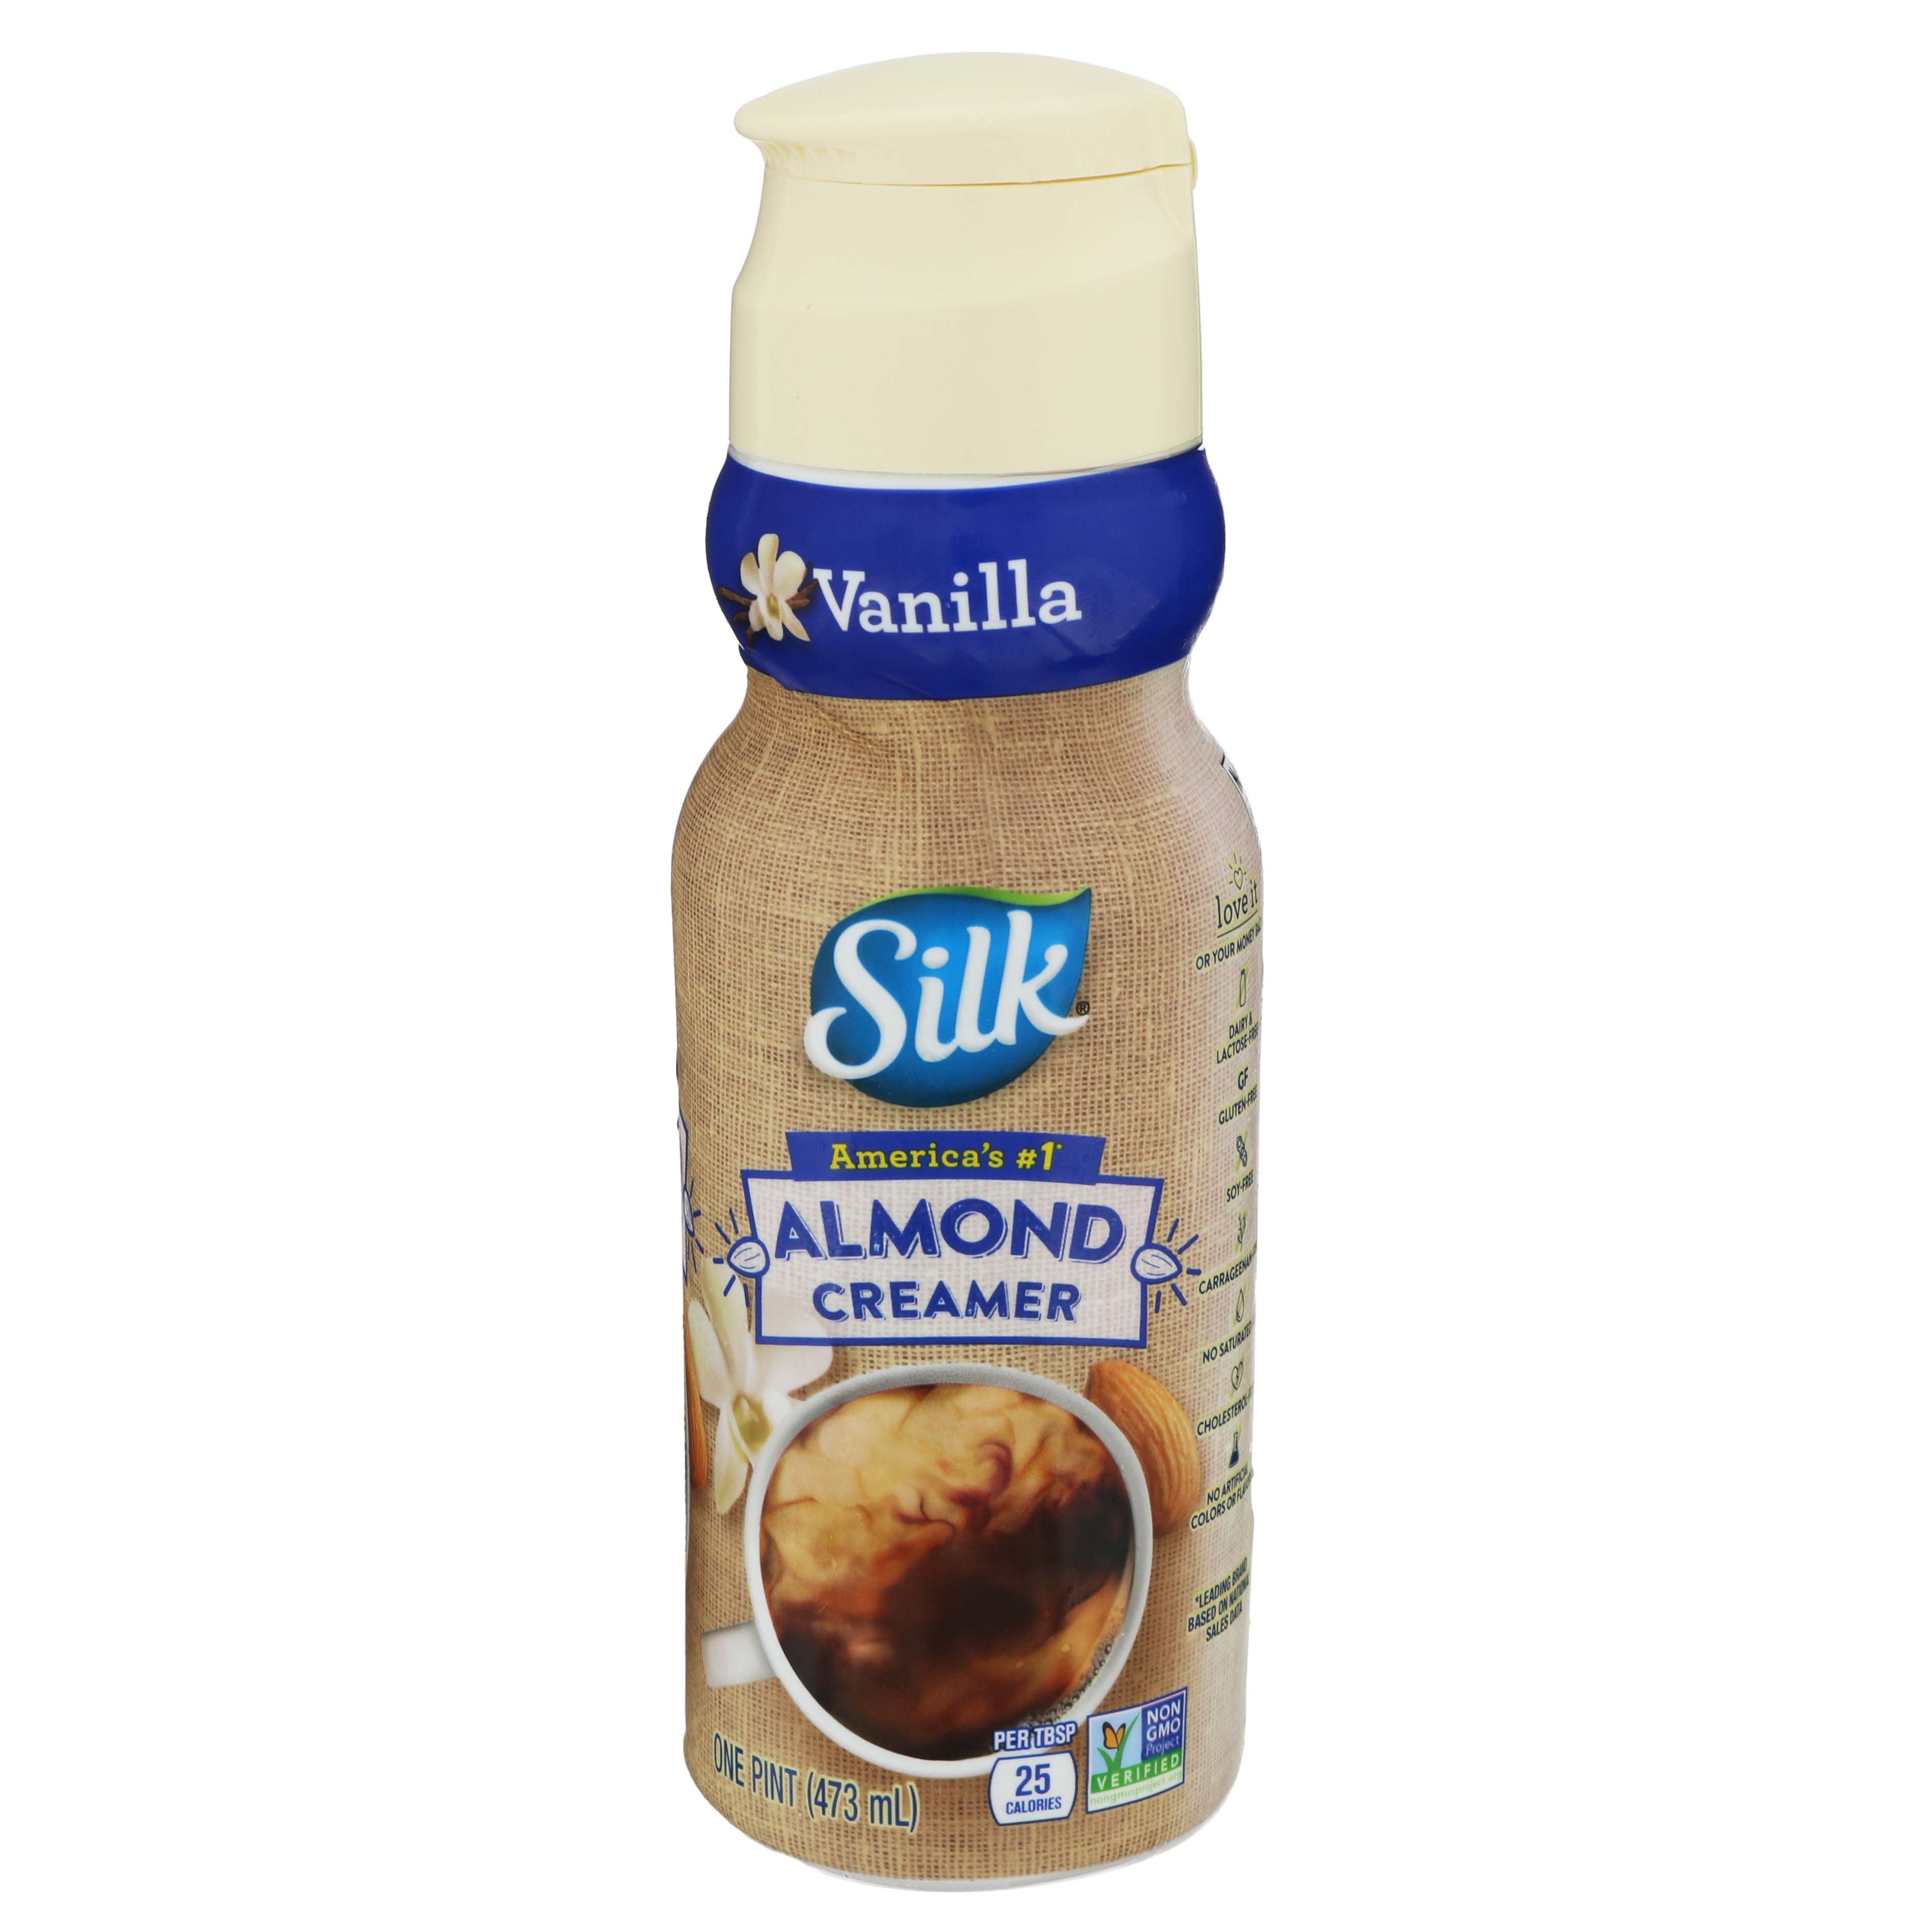 Silk Vanilla Almond Creamer Review – Magnify Your Style